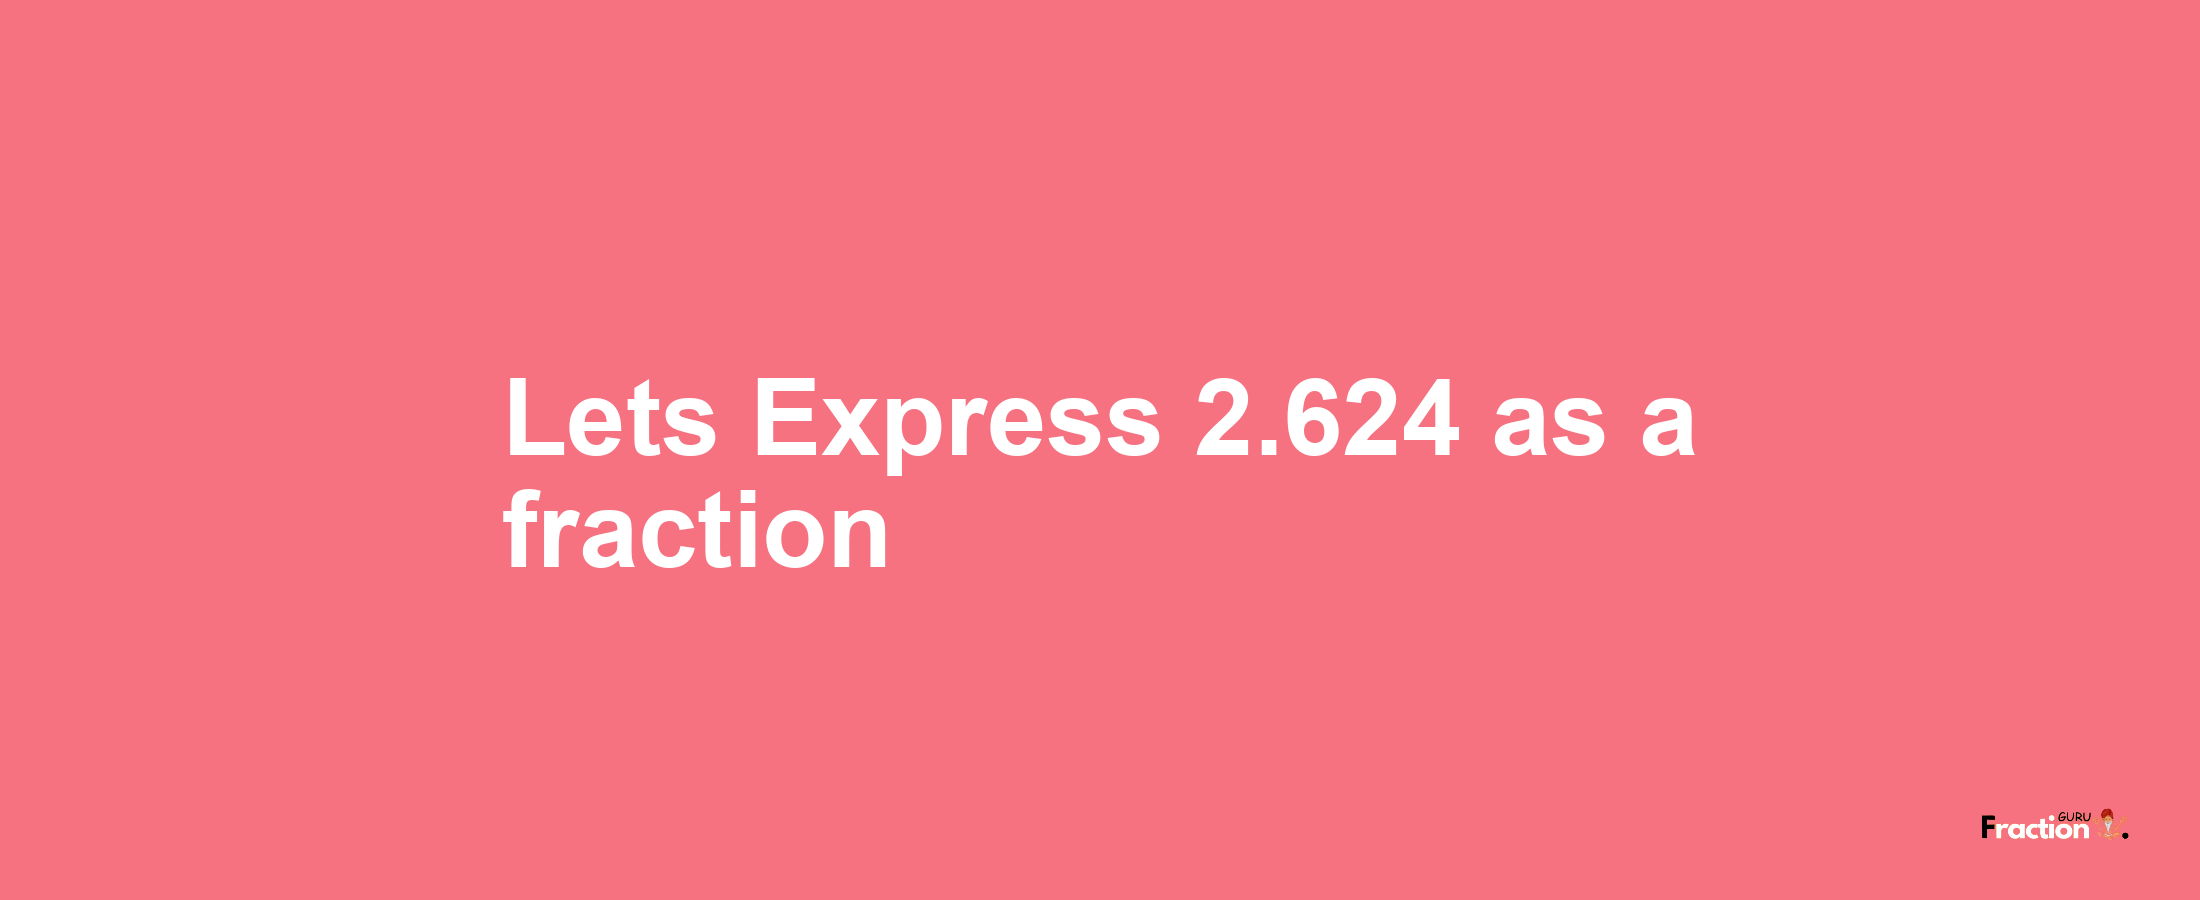 Lets Express 2.624 as afraction